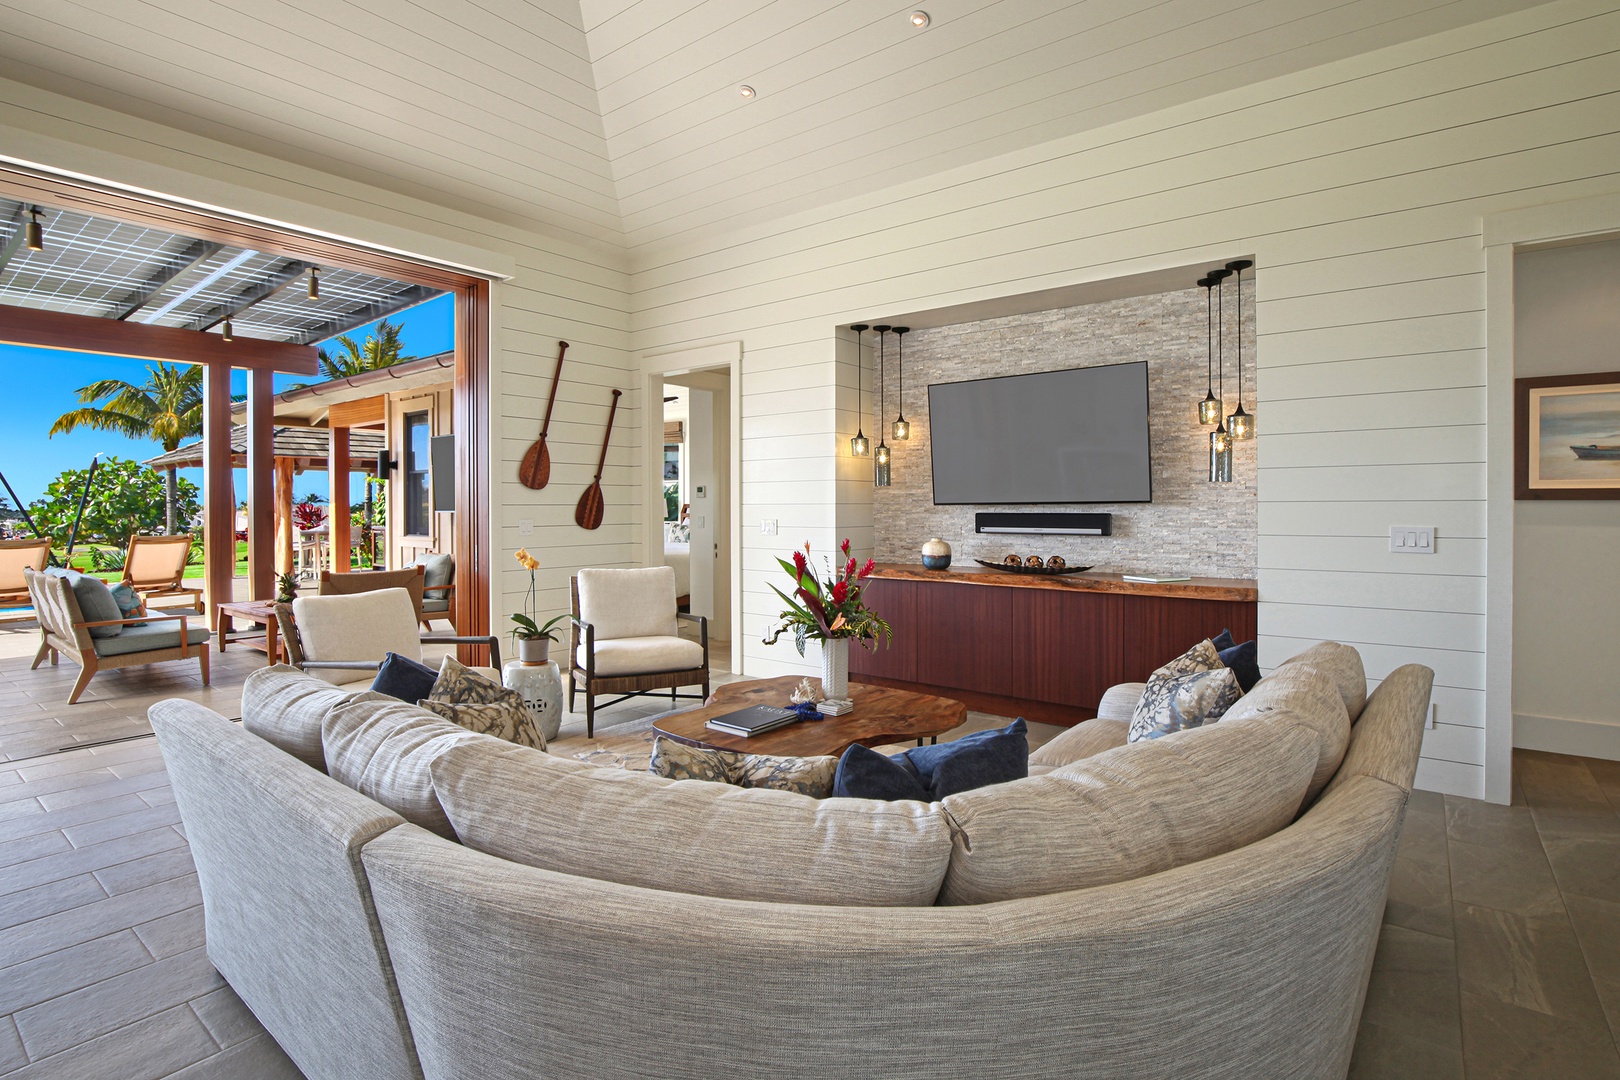 Koloa Vacation Rentals, OFB Hale Mala Ulu - Living room with Smart Tv and Ocean breeze coming through